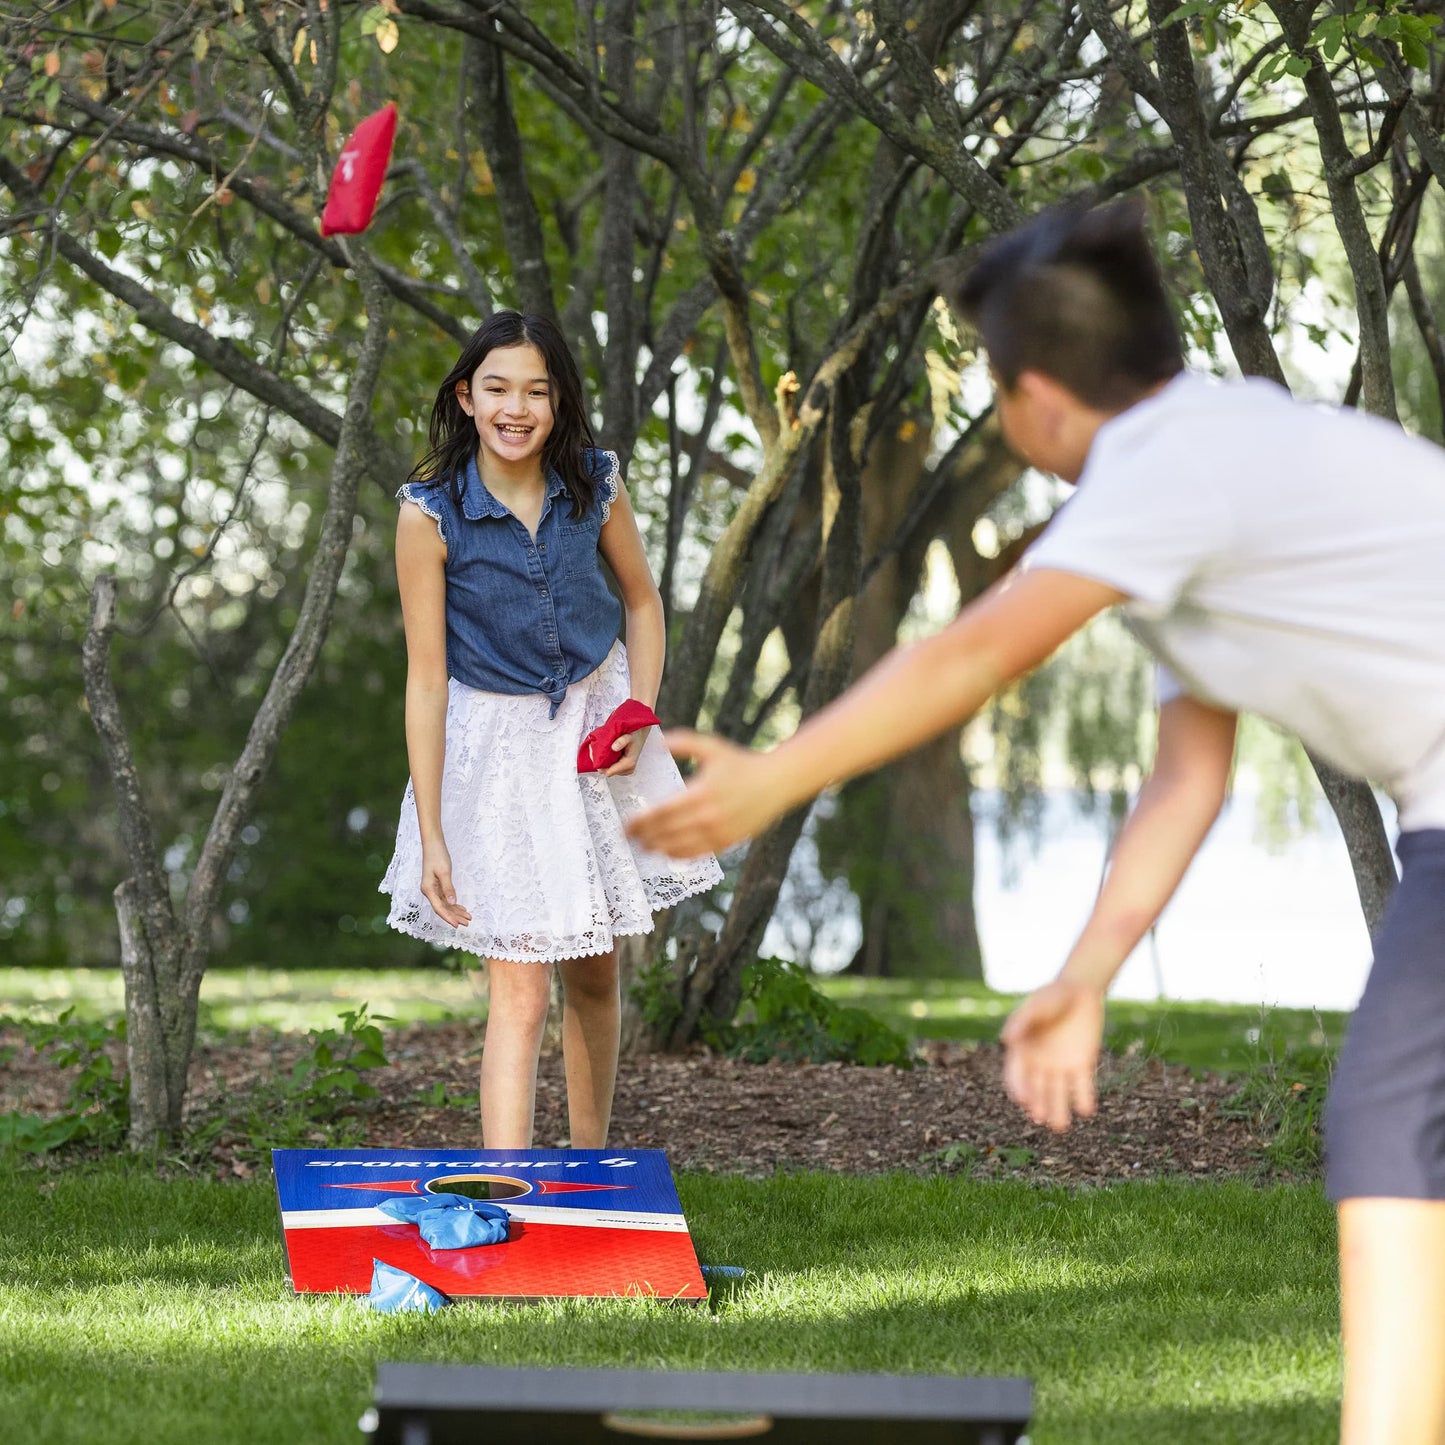 Sportcraft Wooden Corn Hole Bean Bag Toss Lifestyle Image, Kids playing game in a park